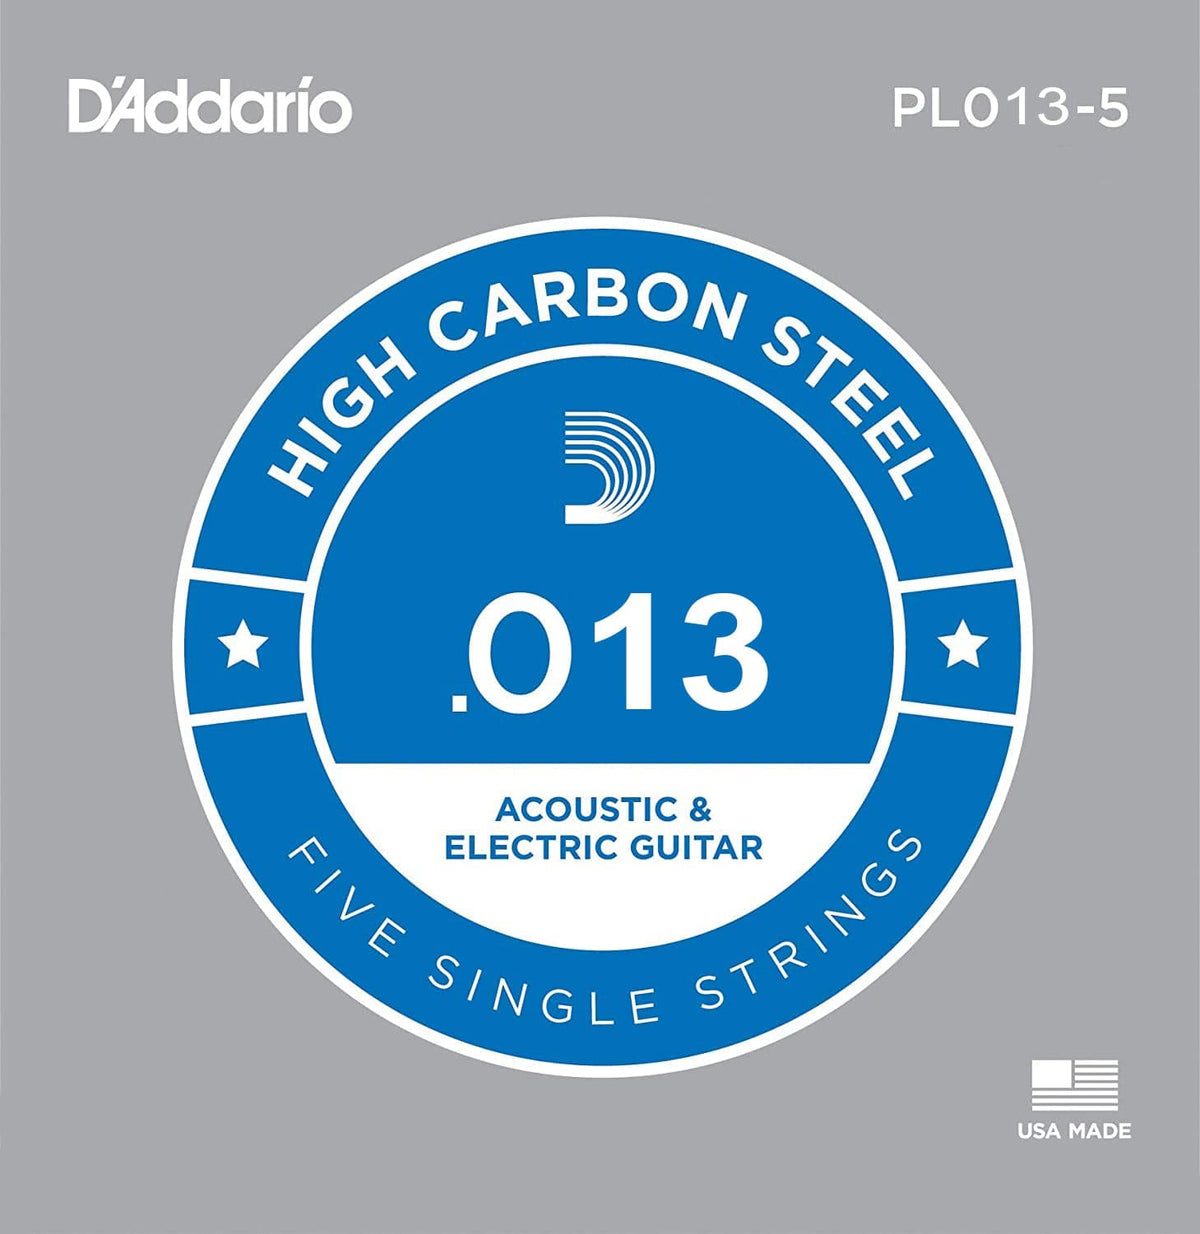 D'Addario PL013-5 Plain Steel Guitar Strings .013 for Electric & Acoustic - 5 PACK